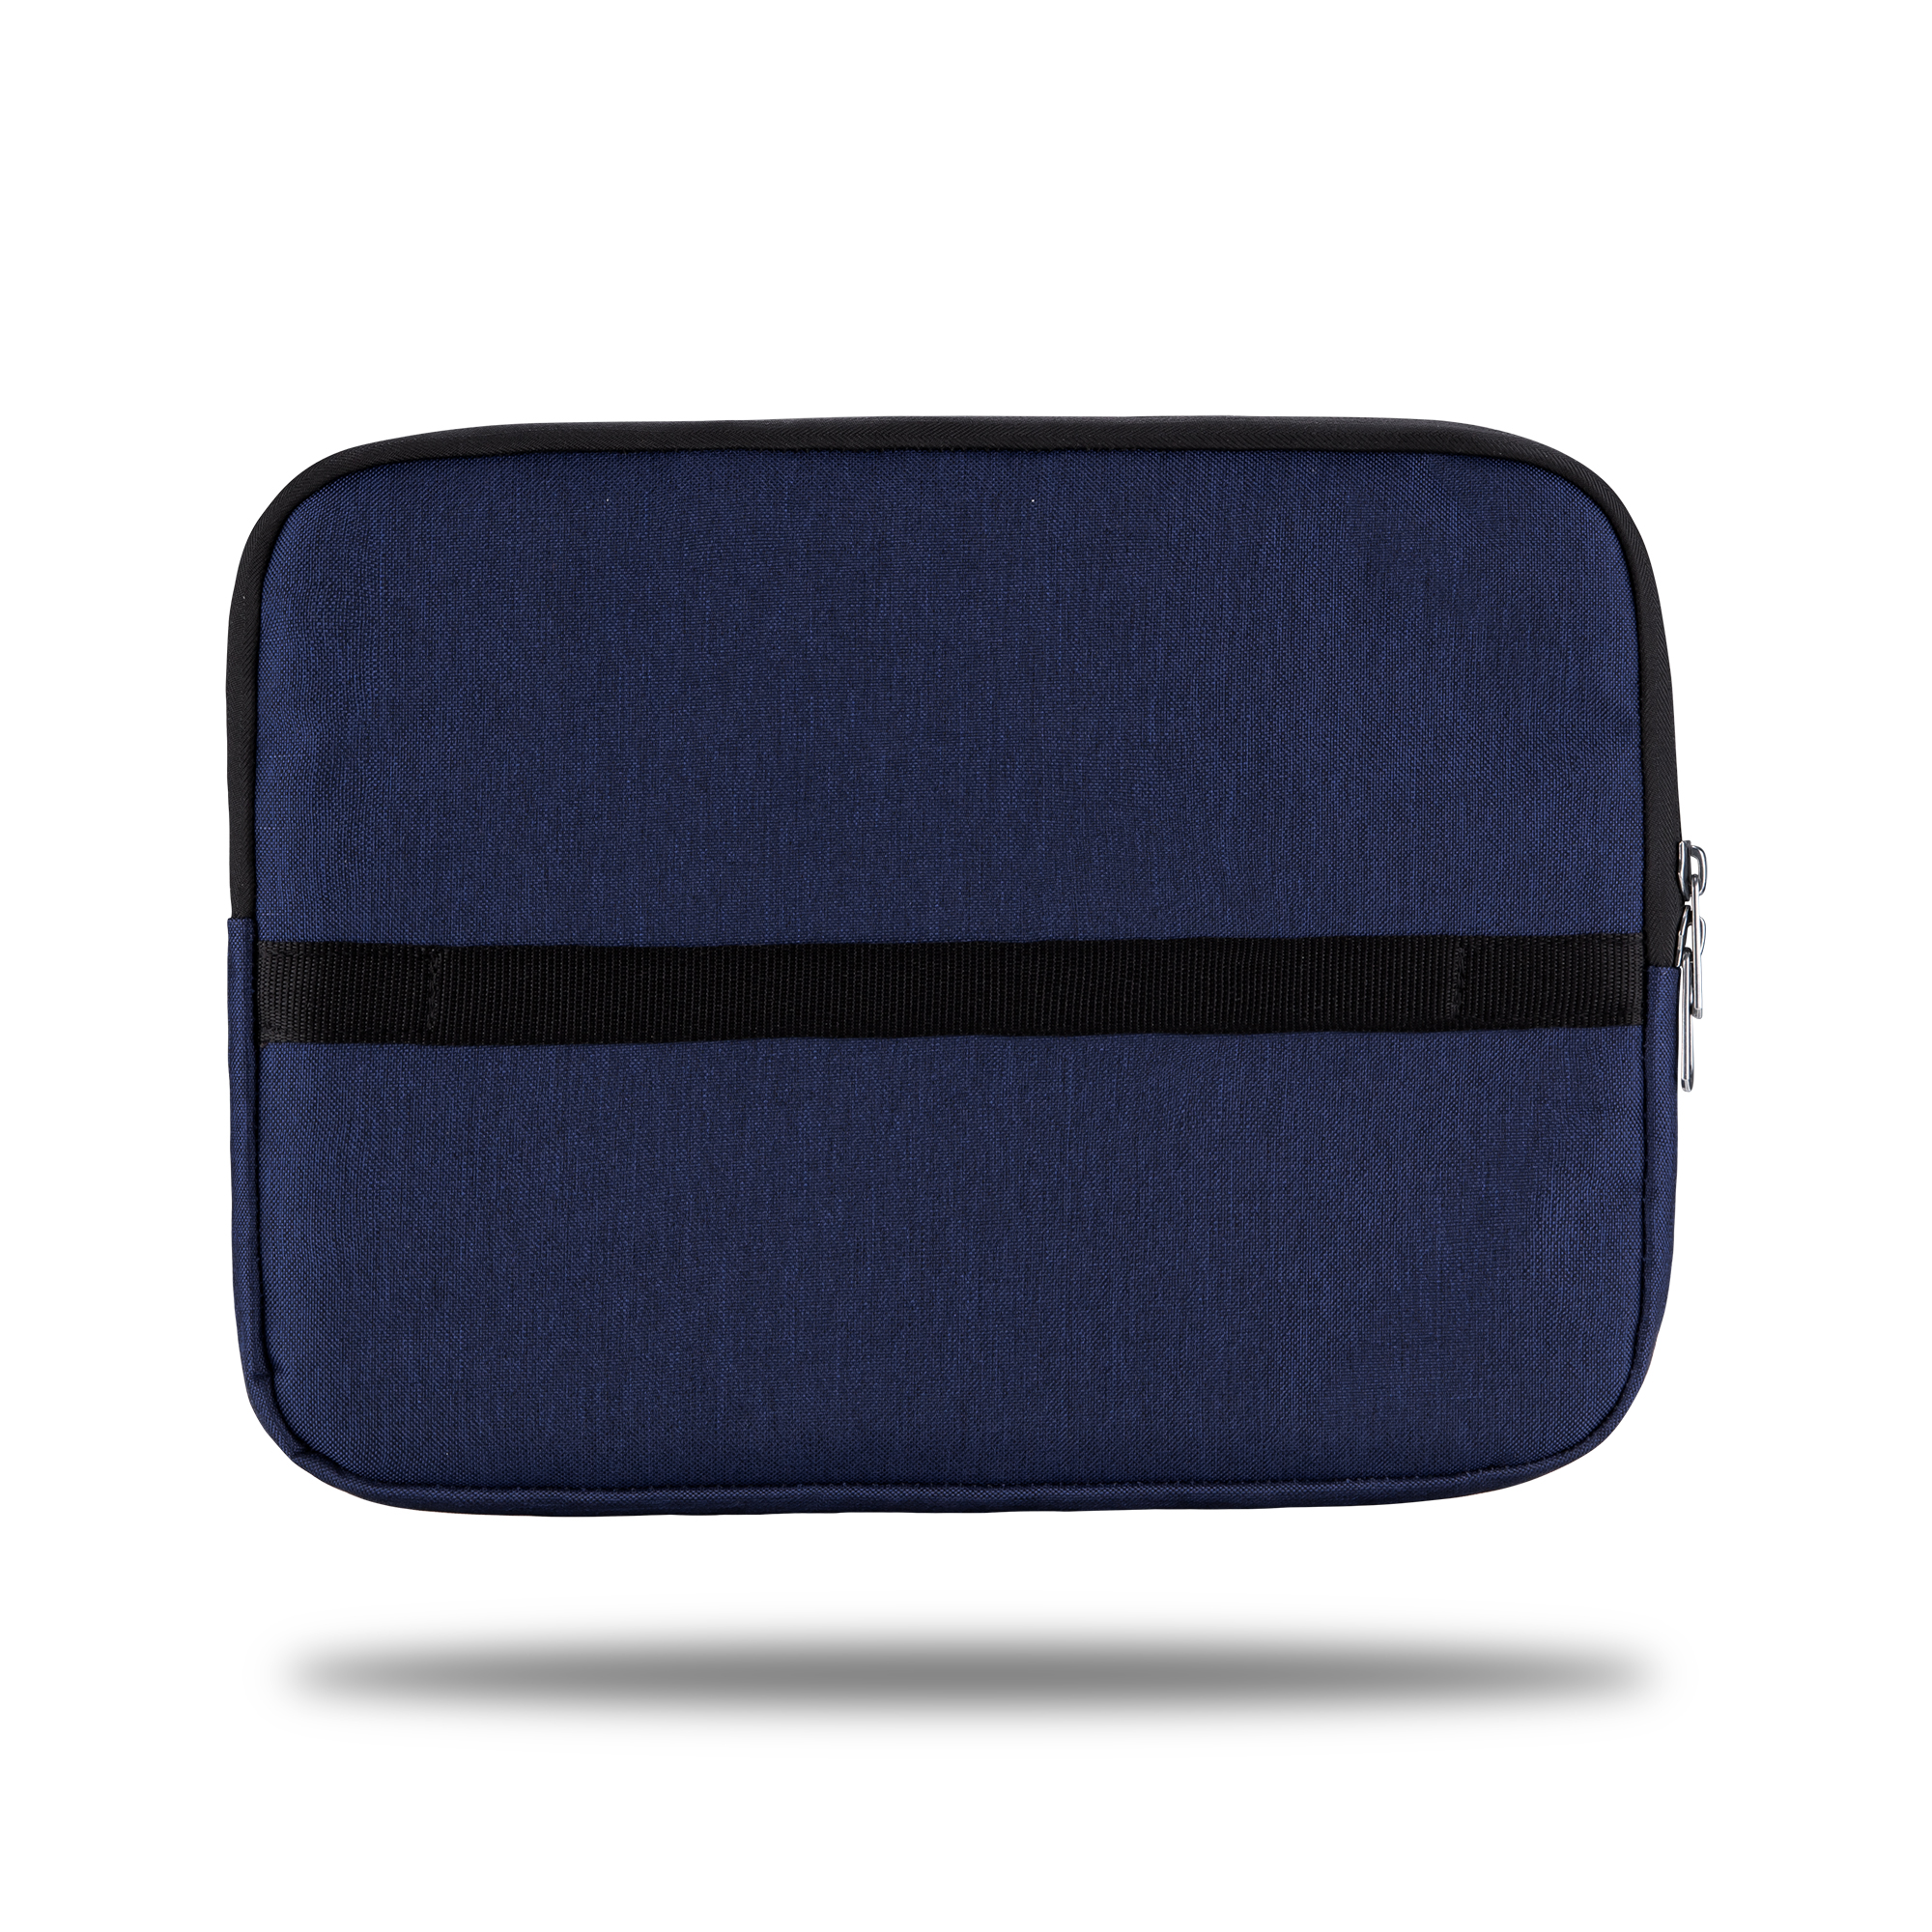 Classone Livorno Series WSL1501 15.6 inch compatible WTXpro Waterproof Fabric Macbook, Laptop, Notebook Carrying Bag-Navy Blue